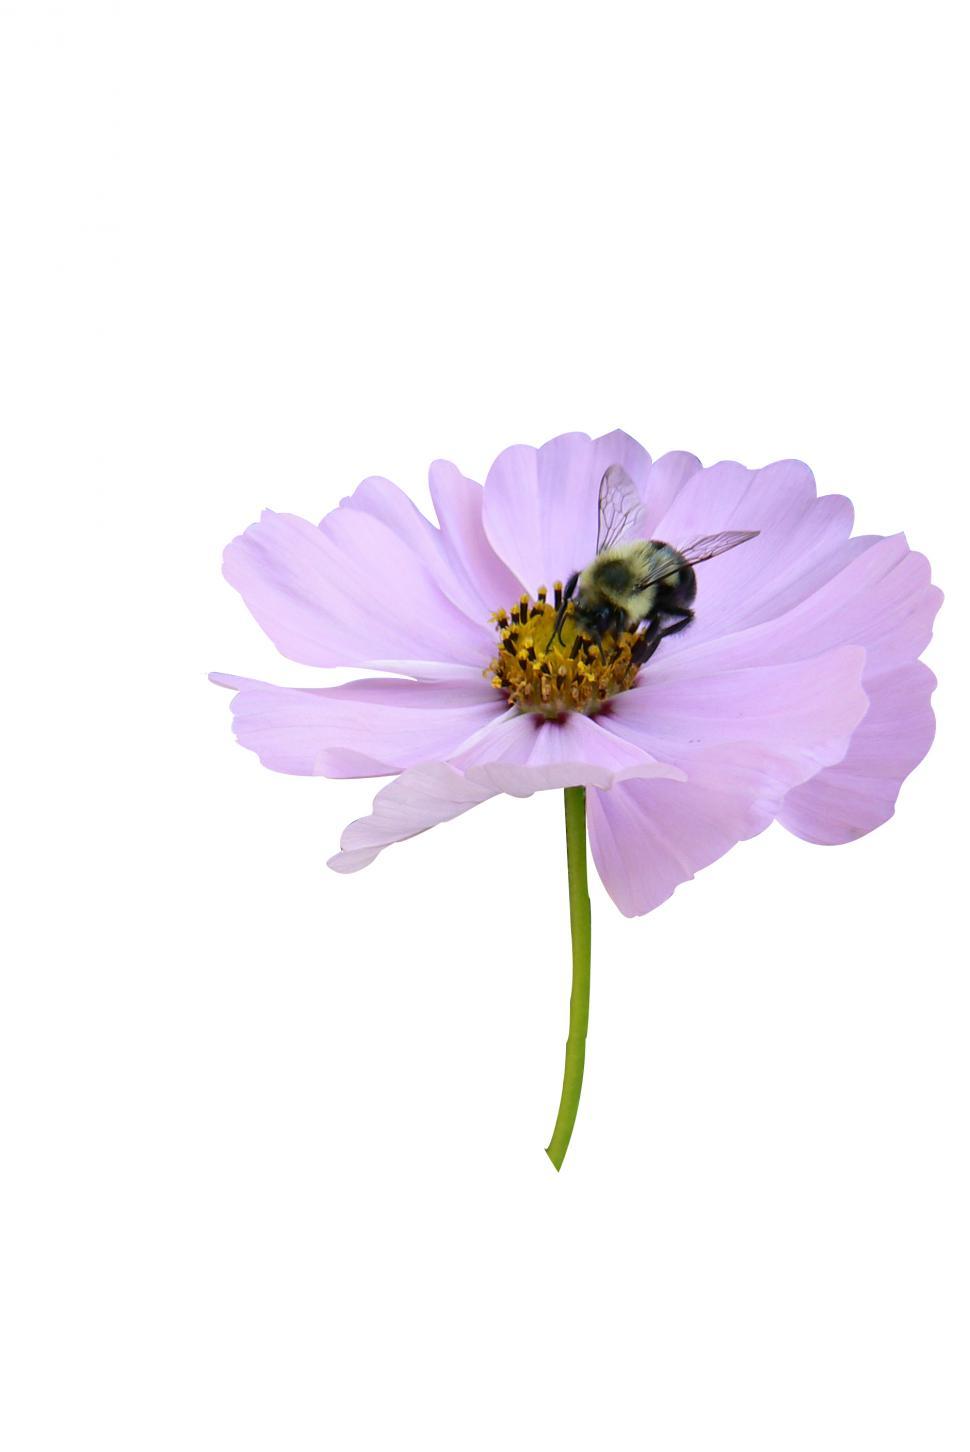 Free Image of Bee on Flower  